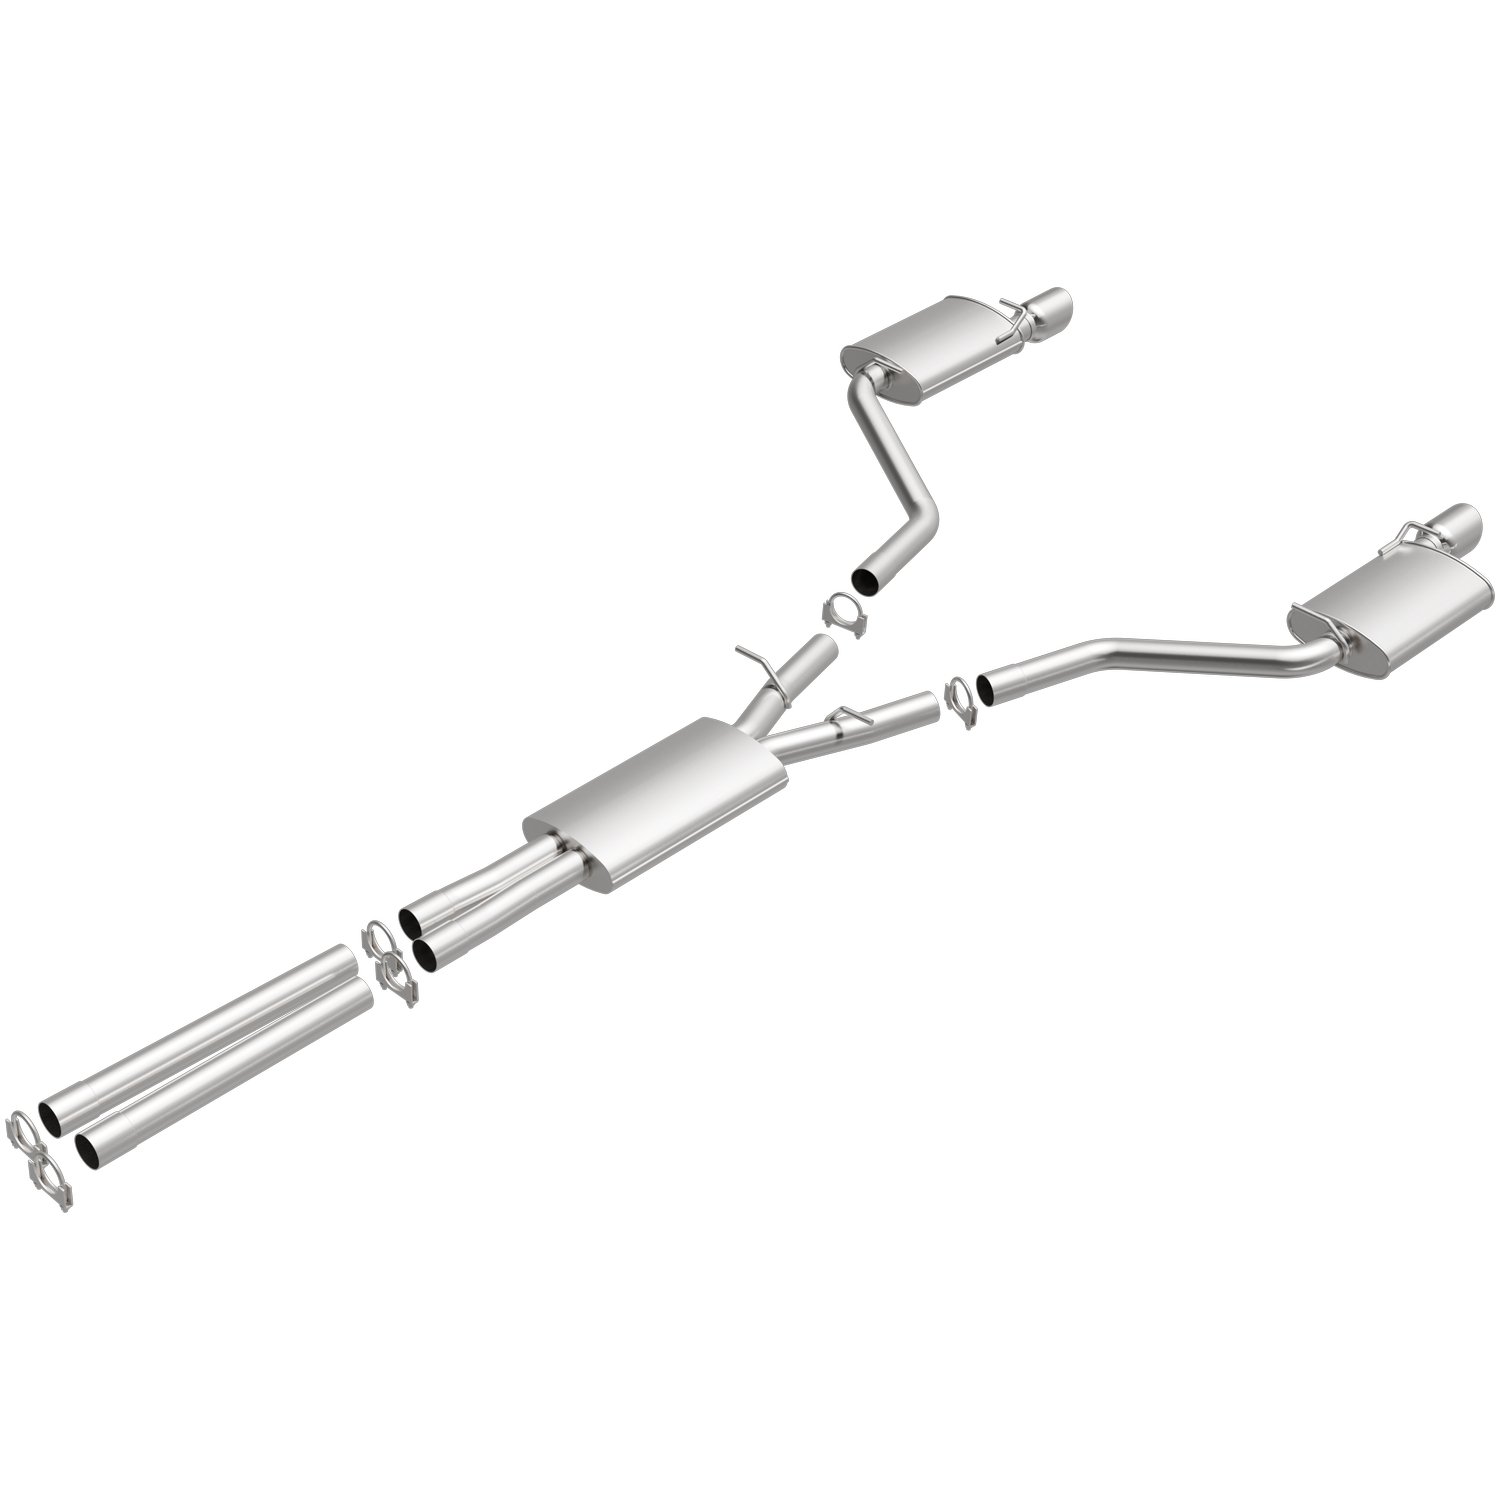 Direct-Fit Exhaust Kit, 2005-2010 Dodge Magnum/Charger, Chrysler